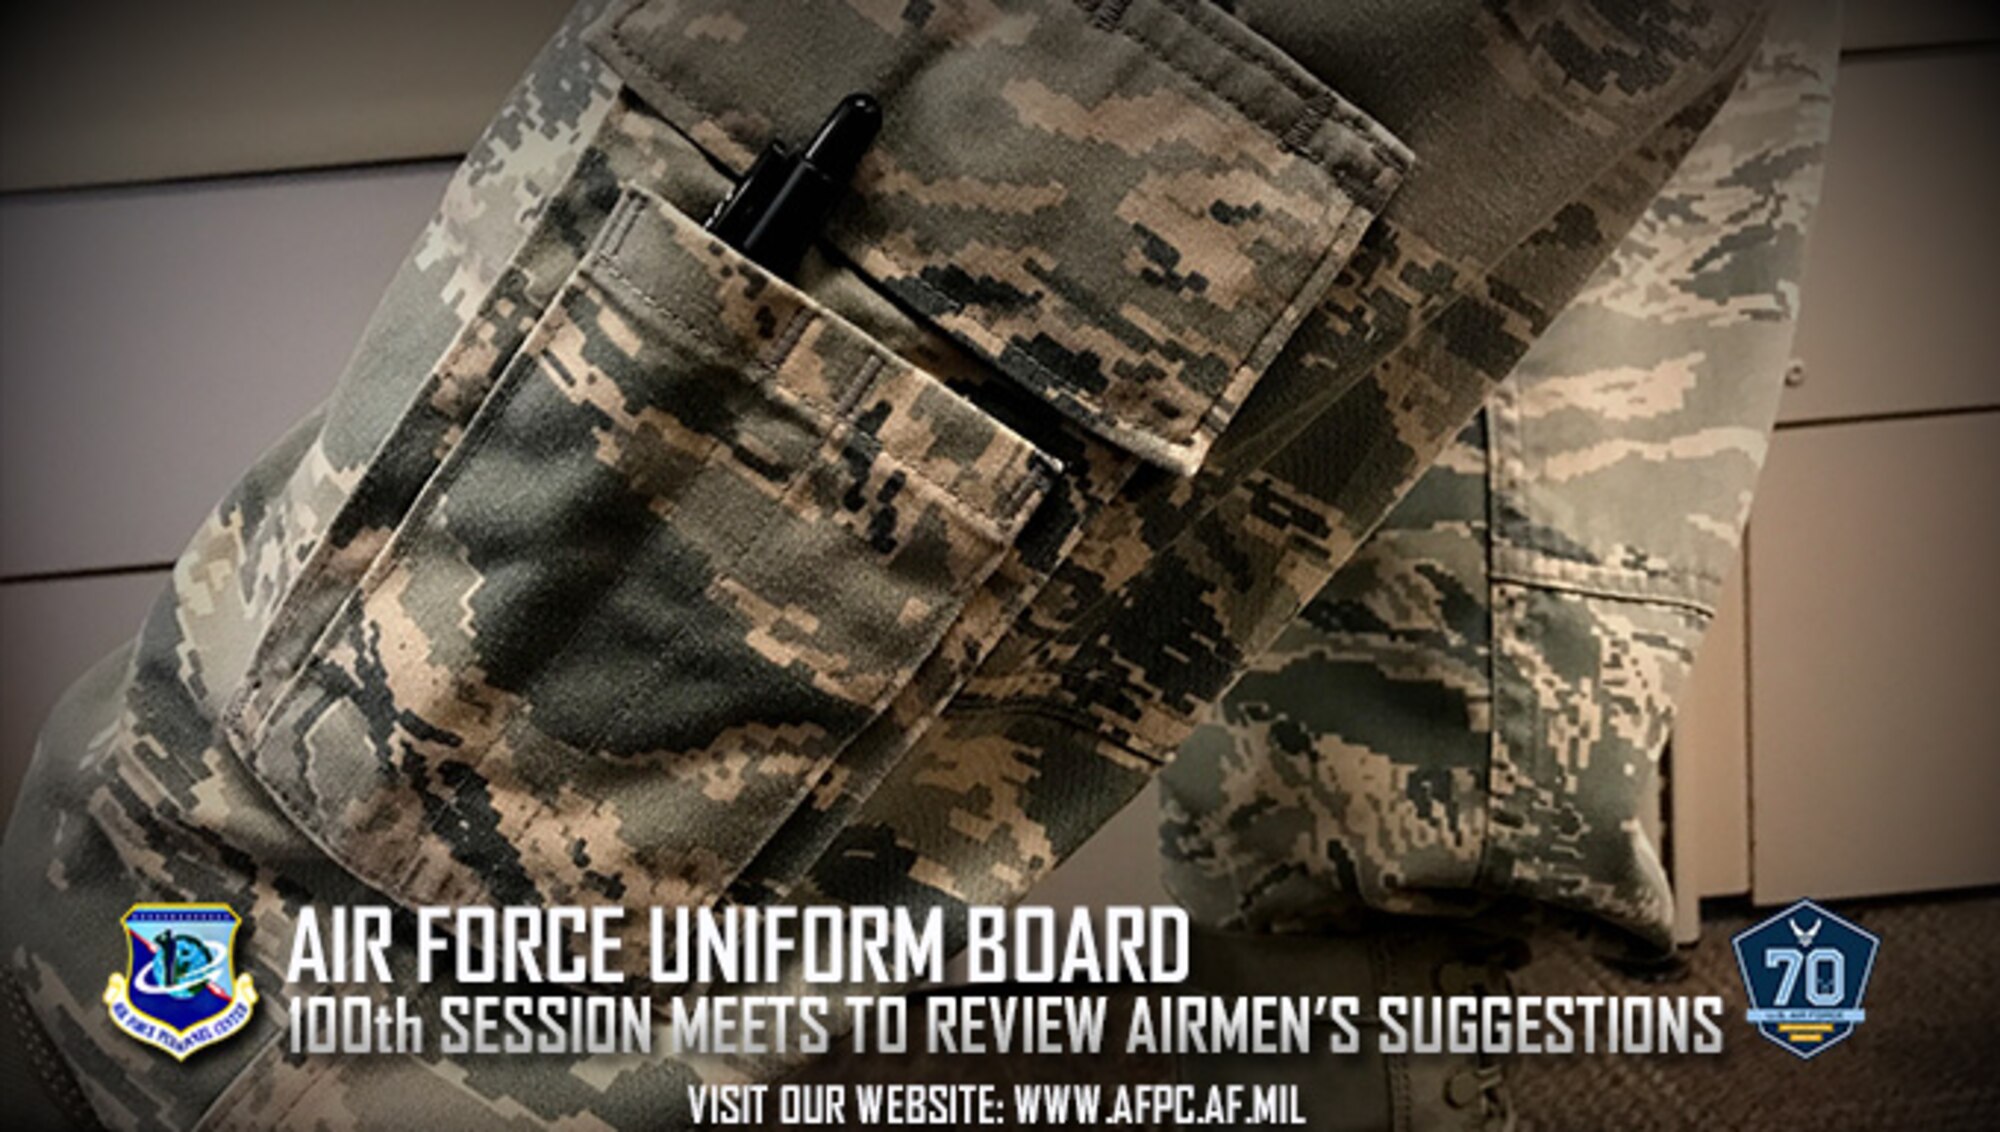 The 100th session of the Air Force Uniform Board is in session through April 28, 2017, to review ideas and recommendations submitted by Airmen in order to improve or change Air Force uniforms, wear policy and grooming standards. The board does not come up with its own ideas, but vets ideas submitted by Airmen. (U.S. Air Force photo by Kat Bailey)